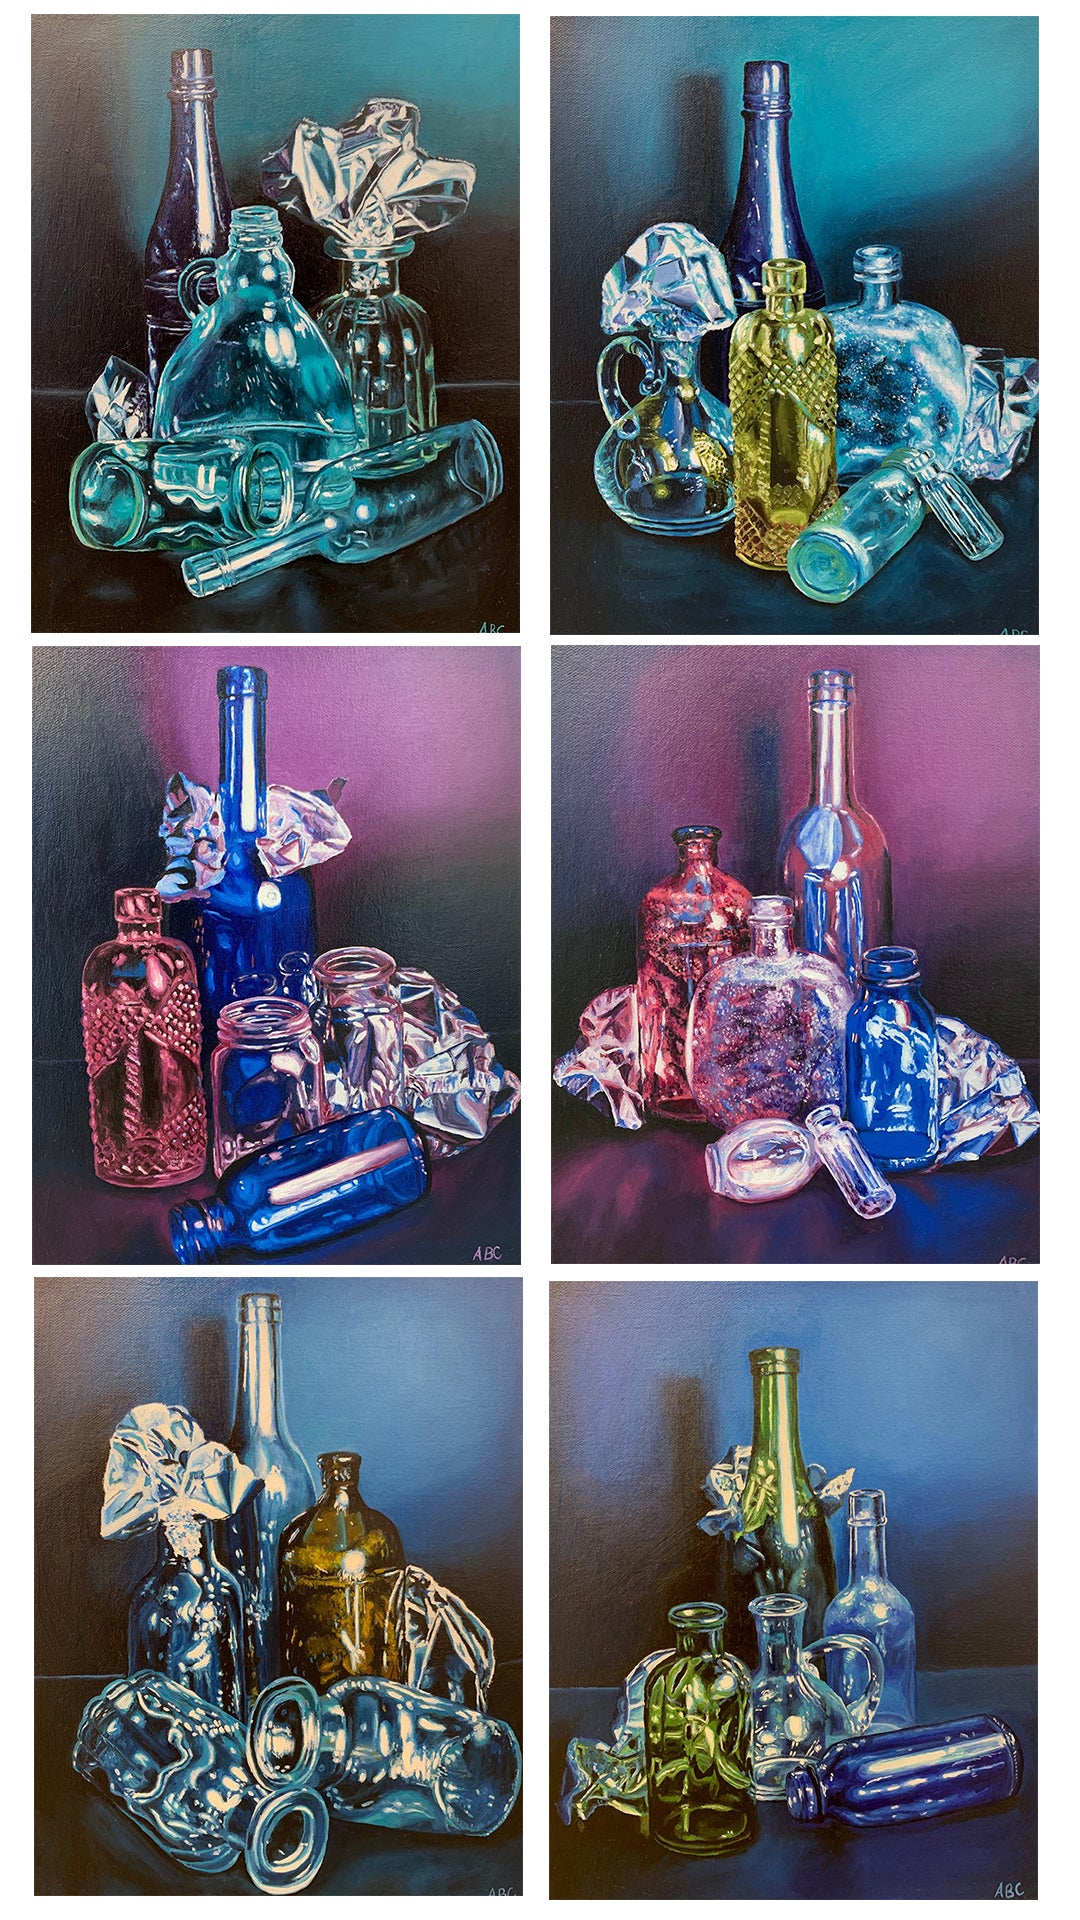 Senior project series of 6 colorful still life arrangements of glass objects